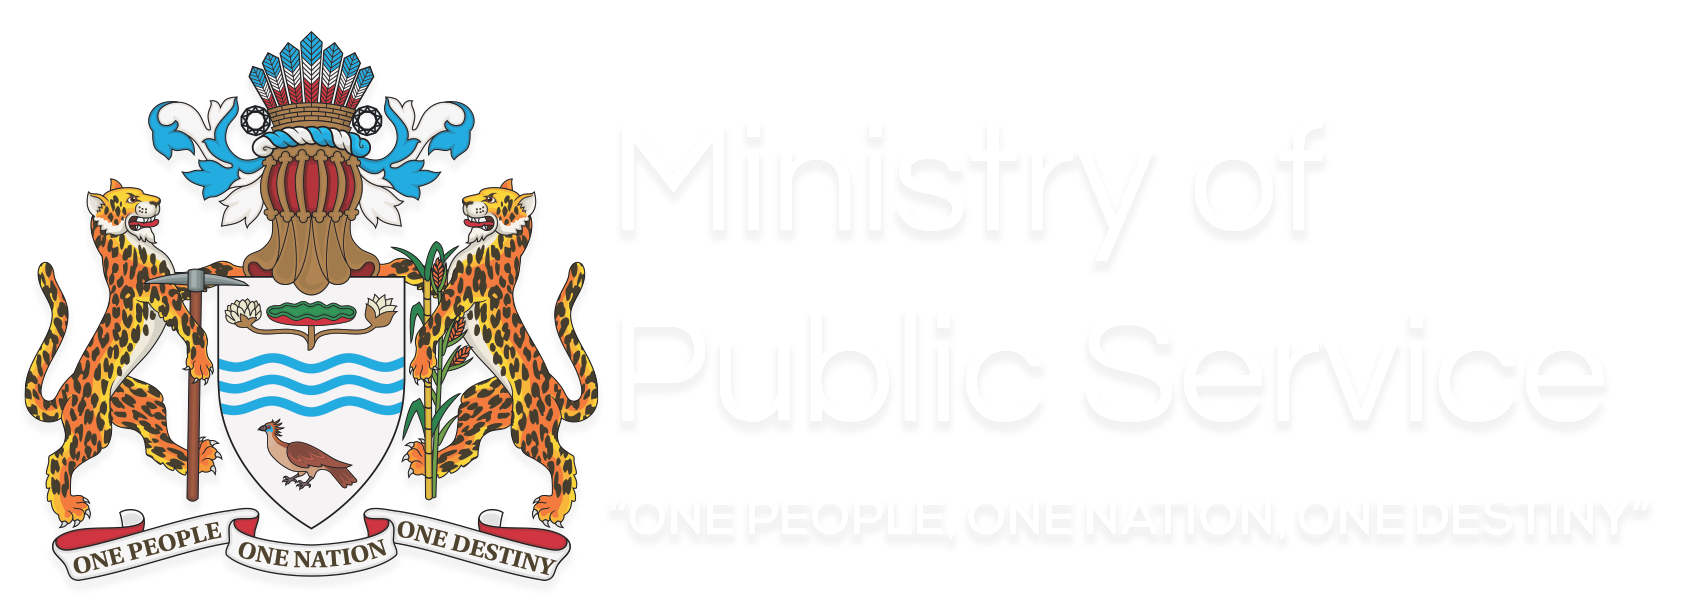 Ministry of Public Service